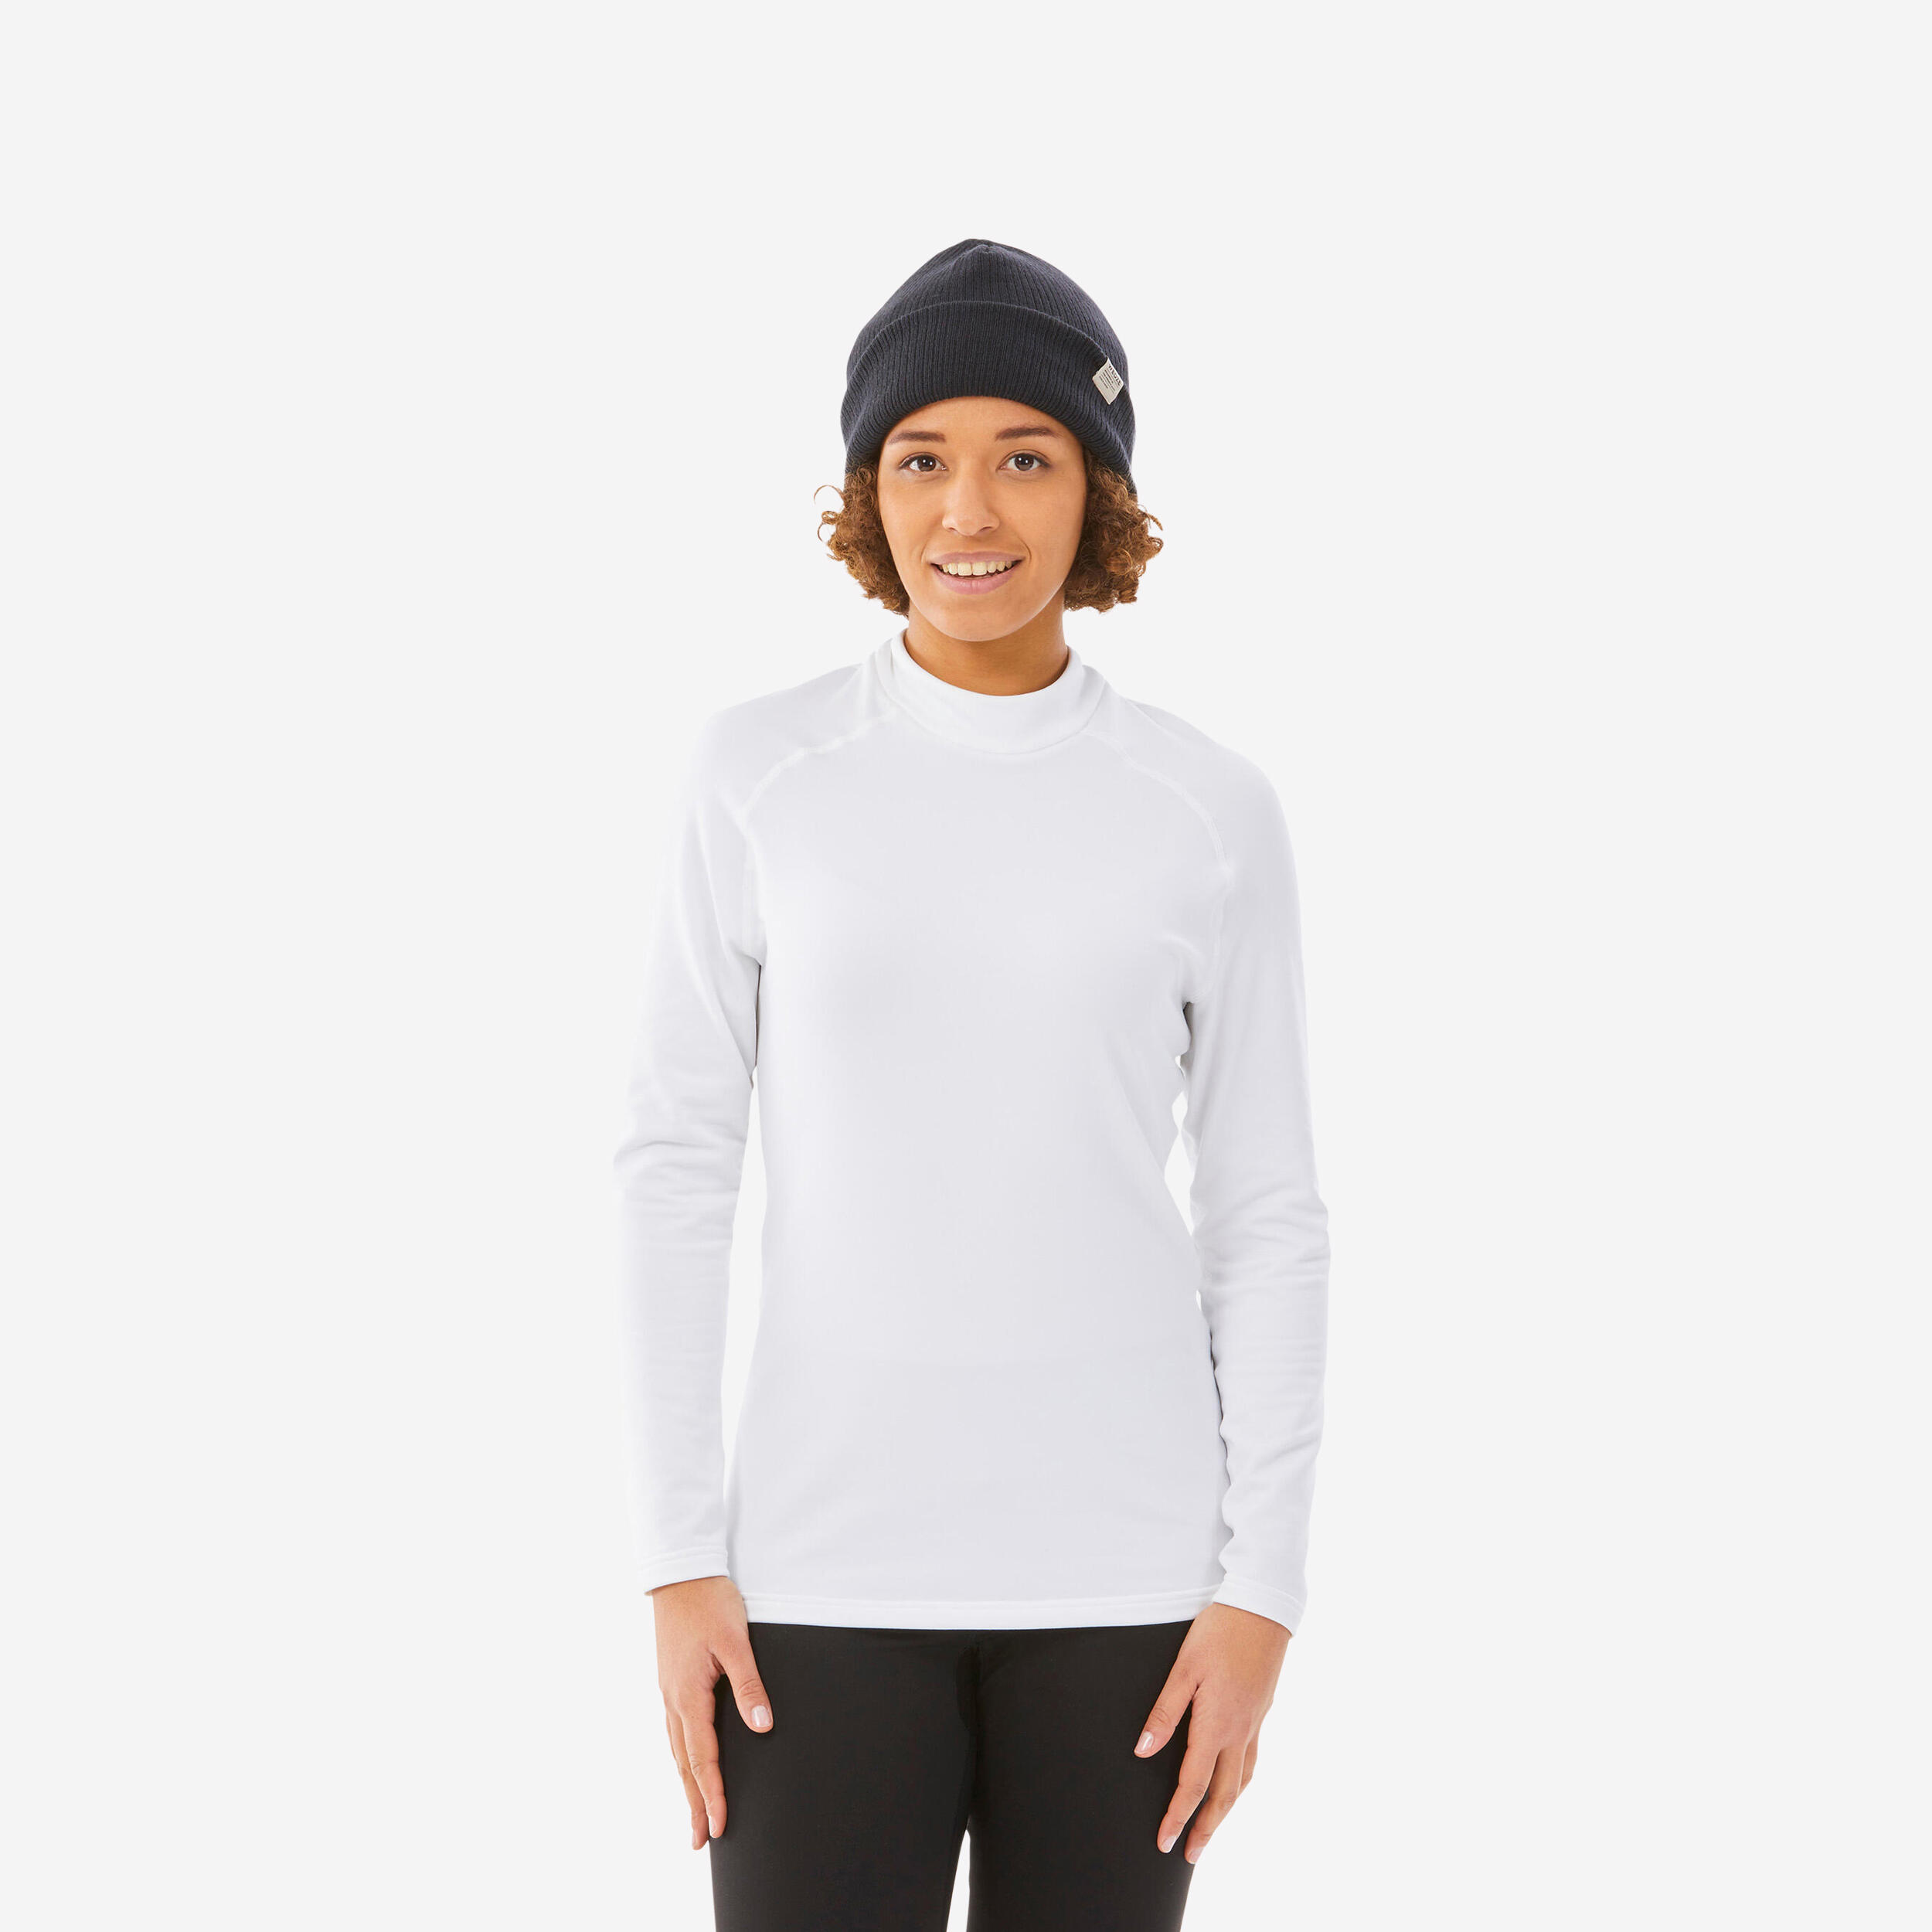 Lake Girl Graphic Solid White Thermal Top Size XL - 0% off